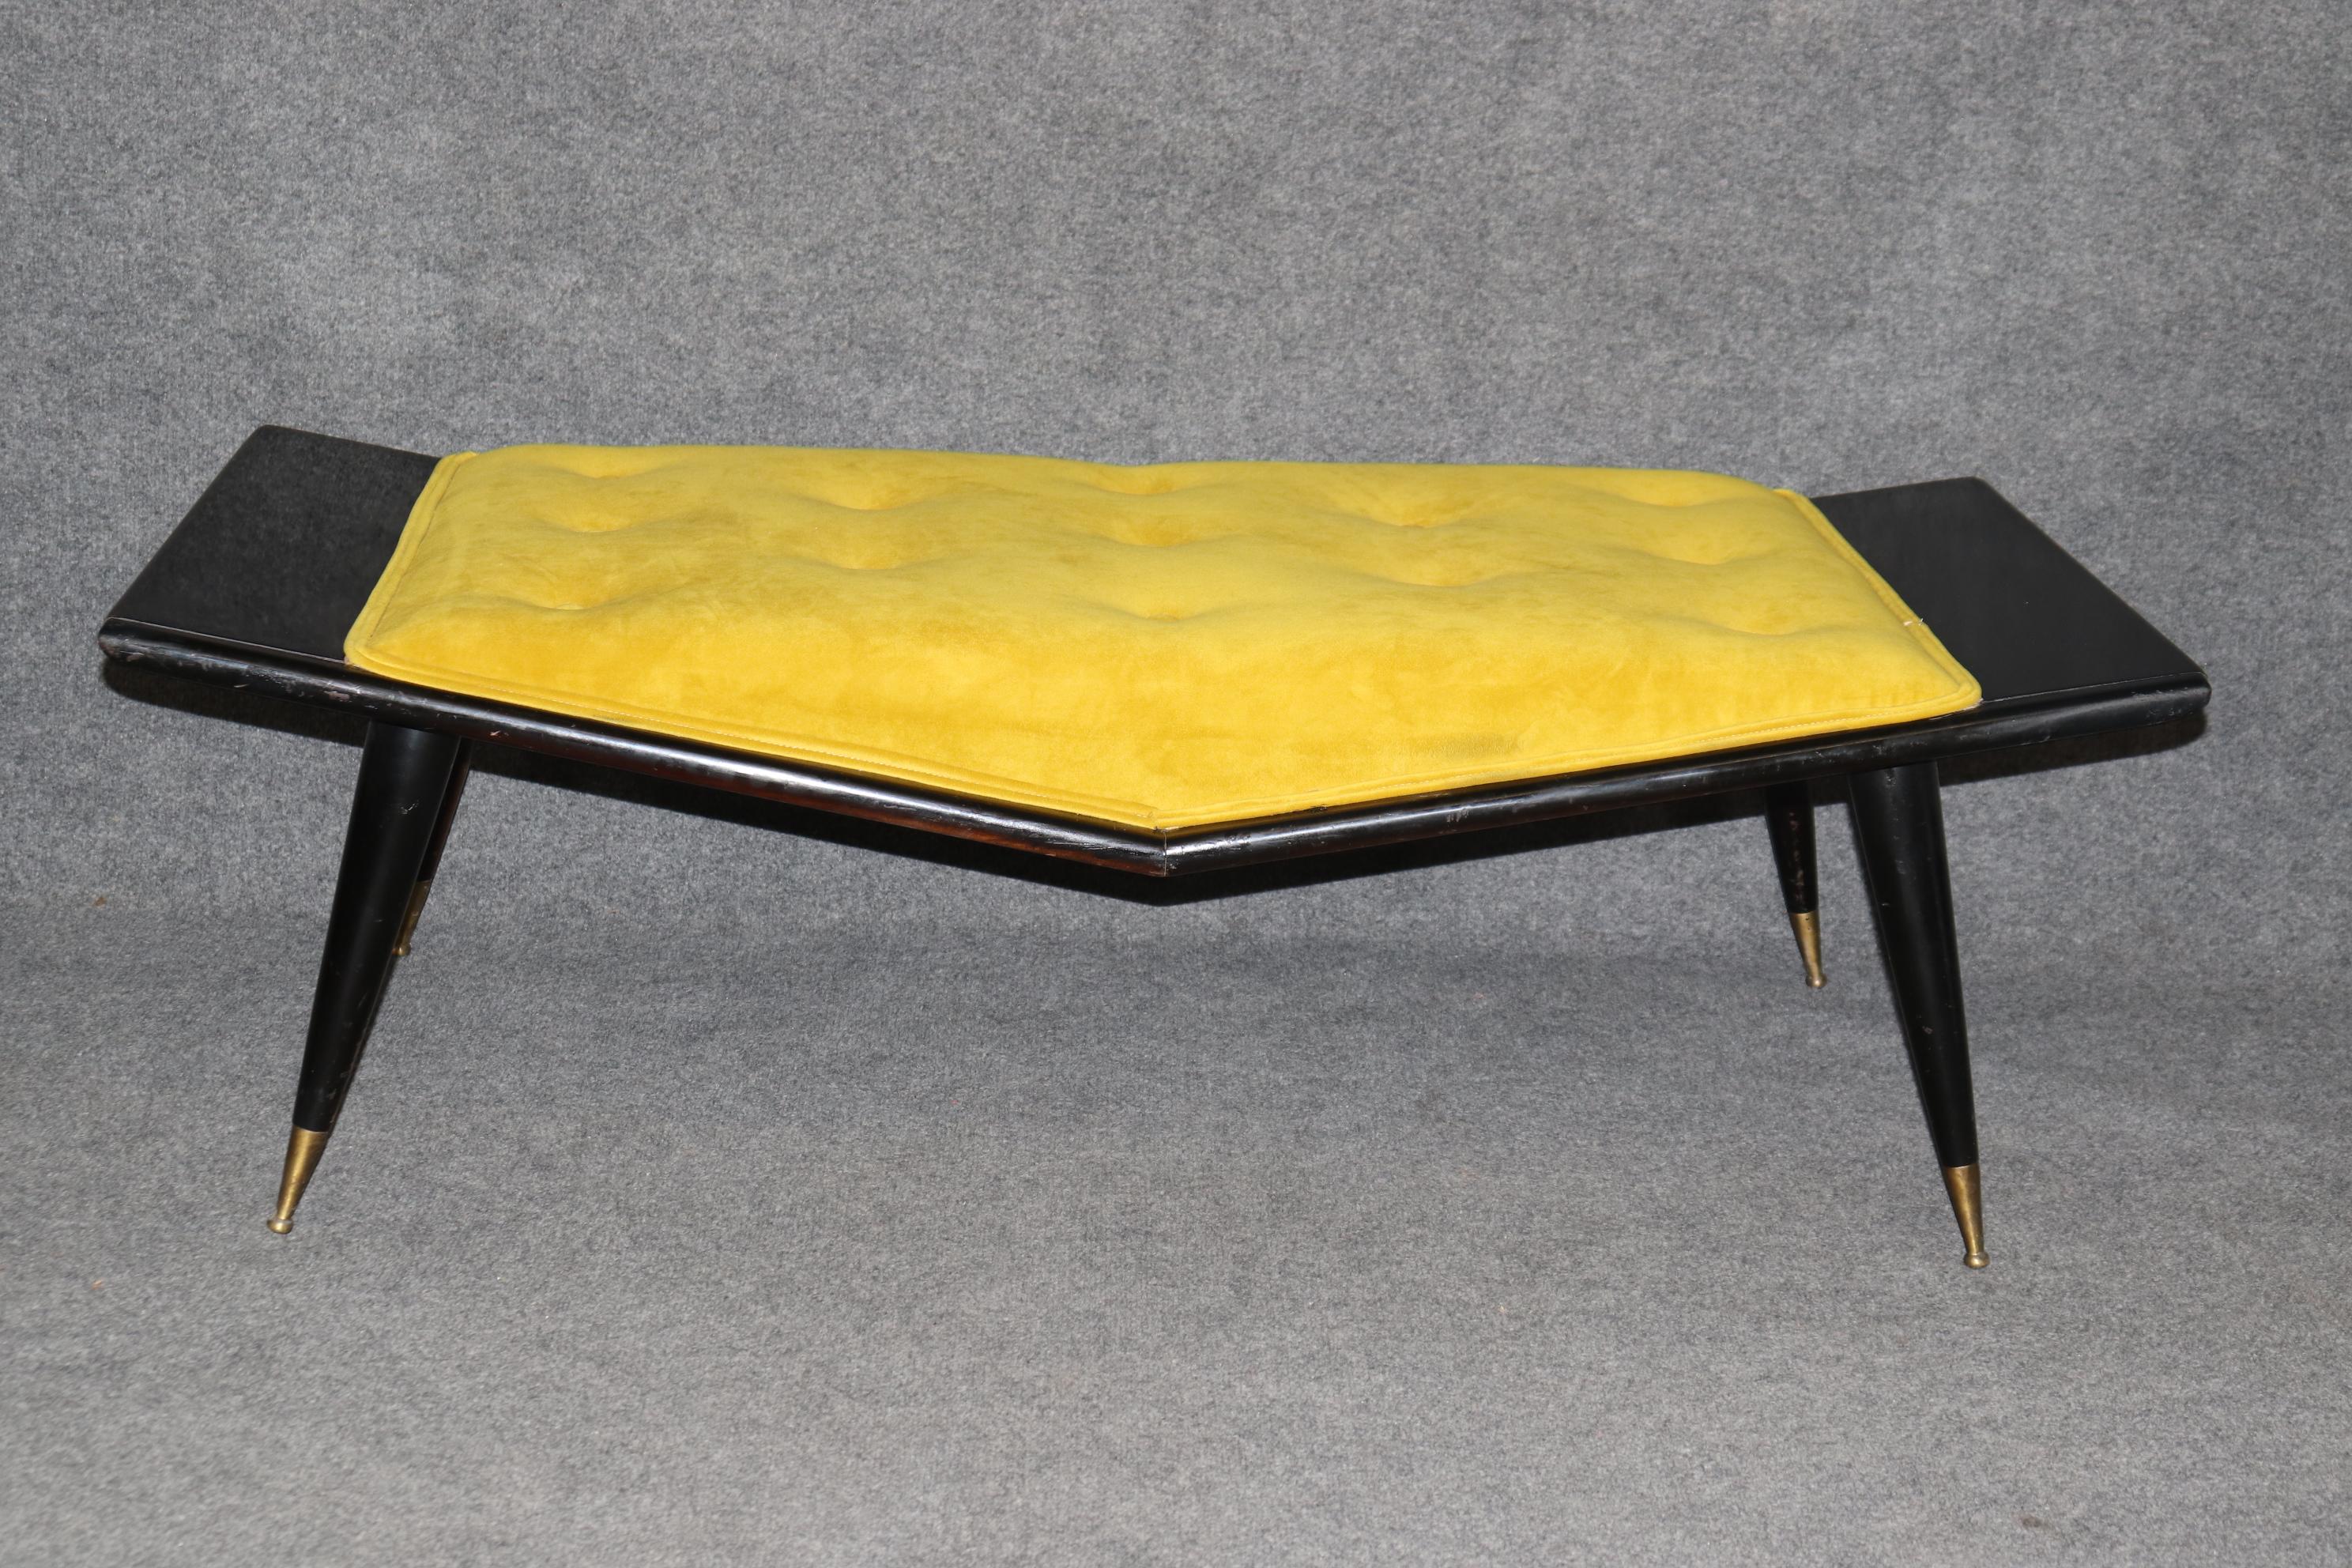 Dimensions - H: 17 1/4in W: 54in D: 24 3/4in 

This Vintage Black Ebonized Mid Century Modern Gio Ponti Style Bench is made of the highest quality and is a lovely example of Quality Modern Furniture. If you look a the photos provided you will see